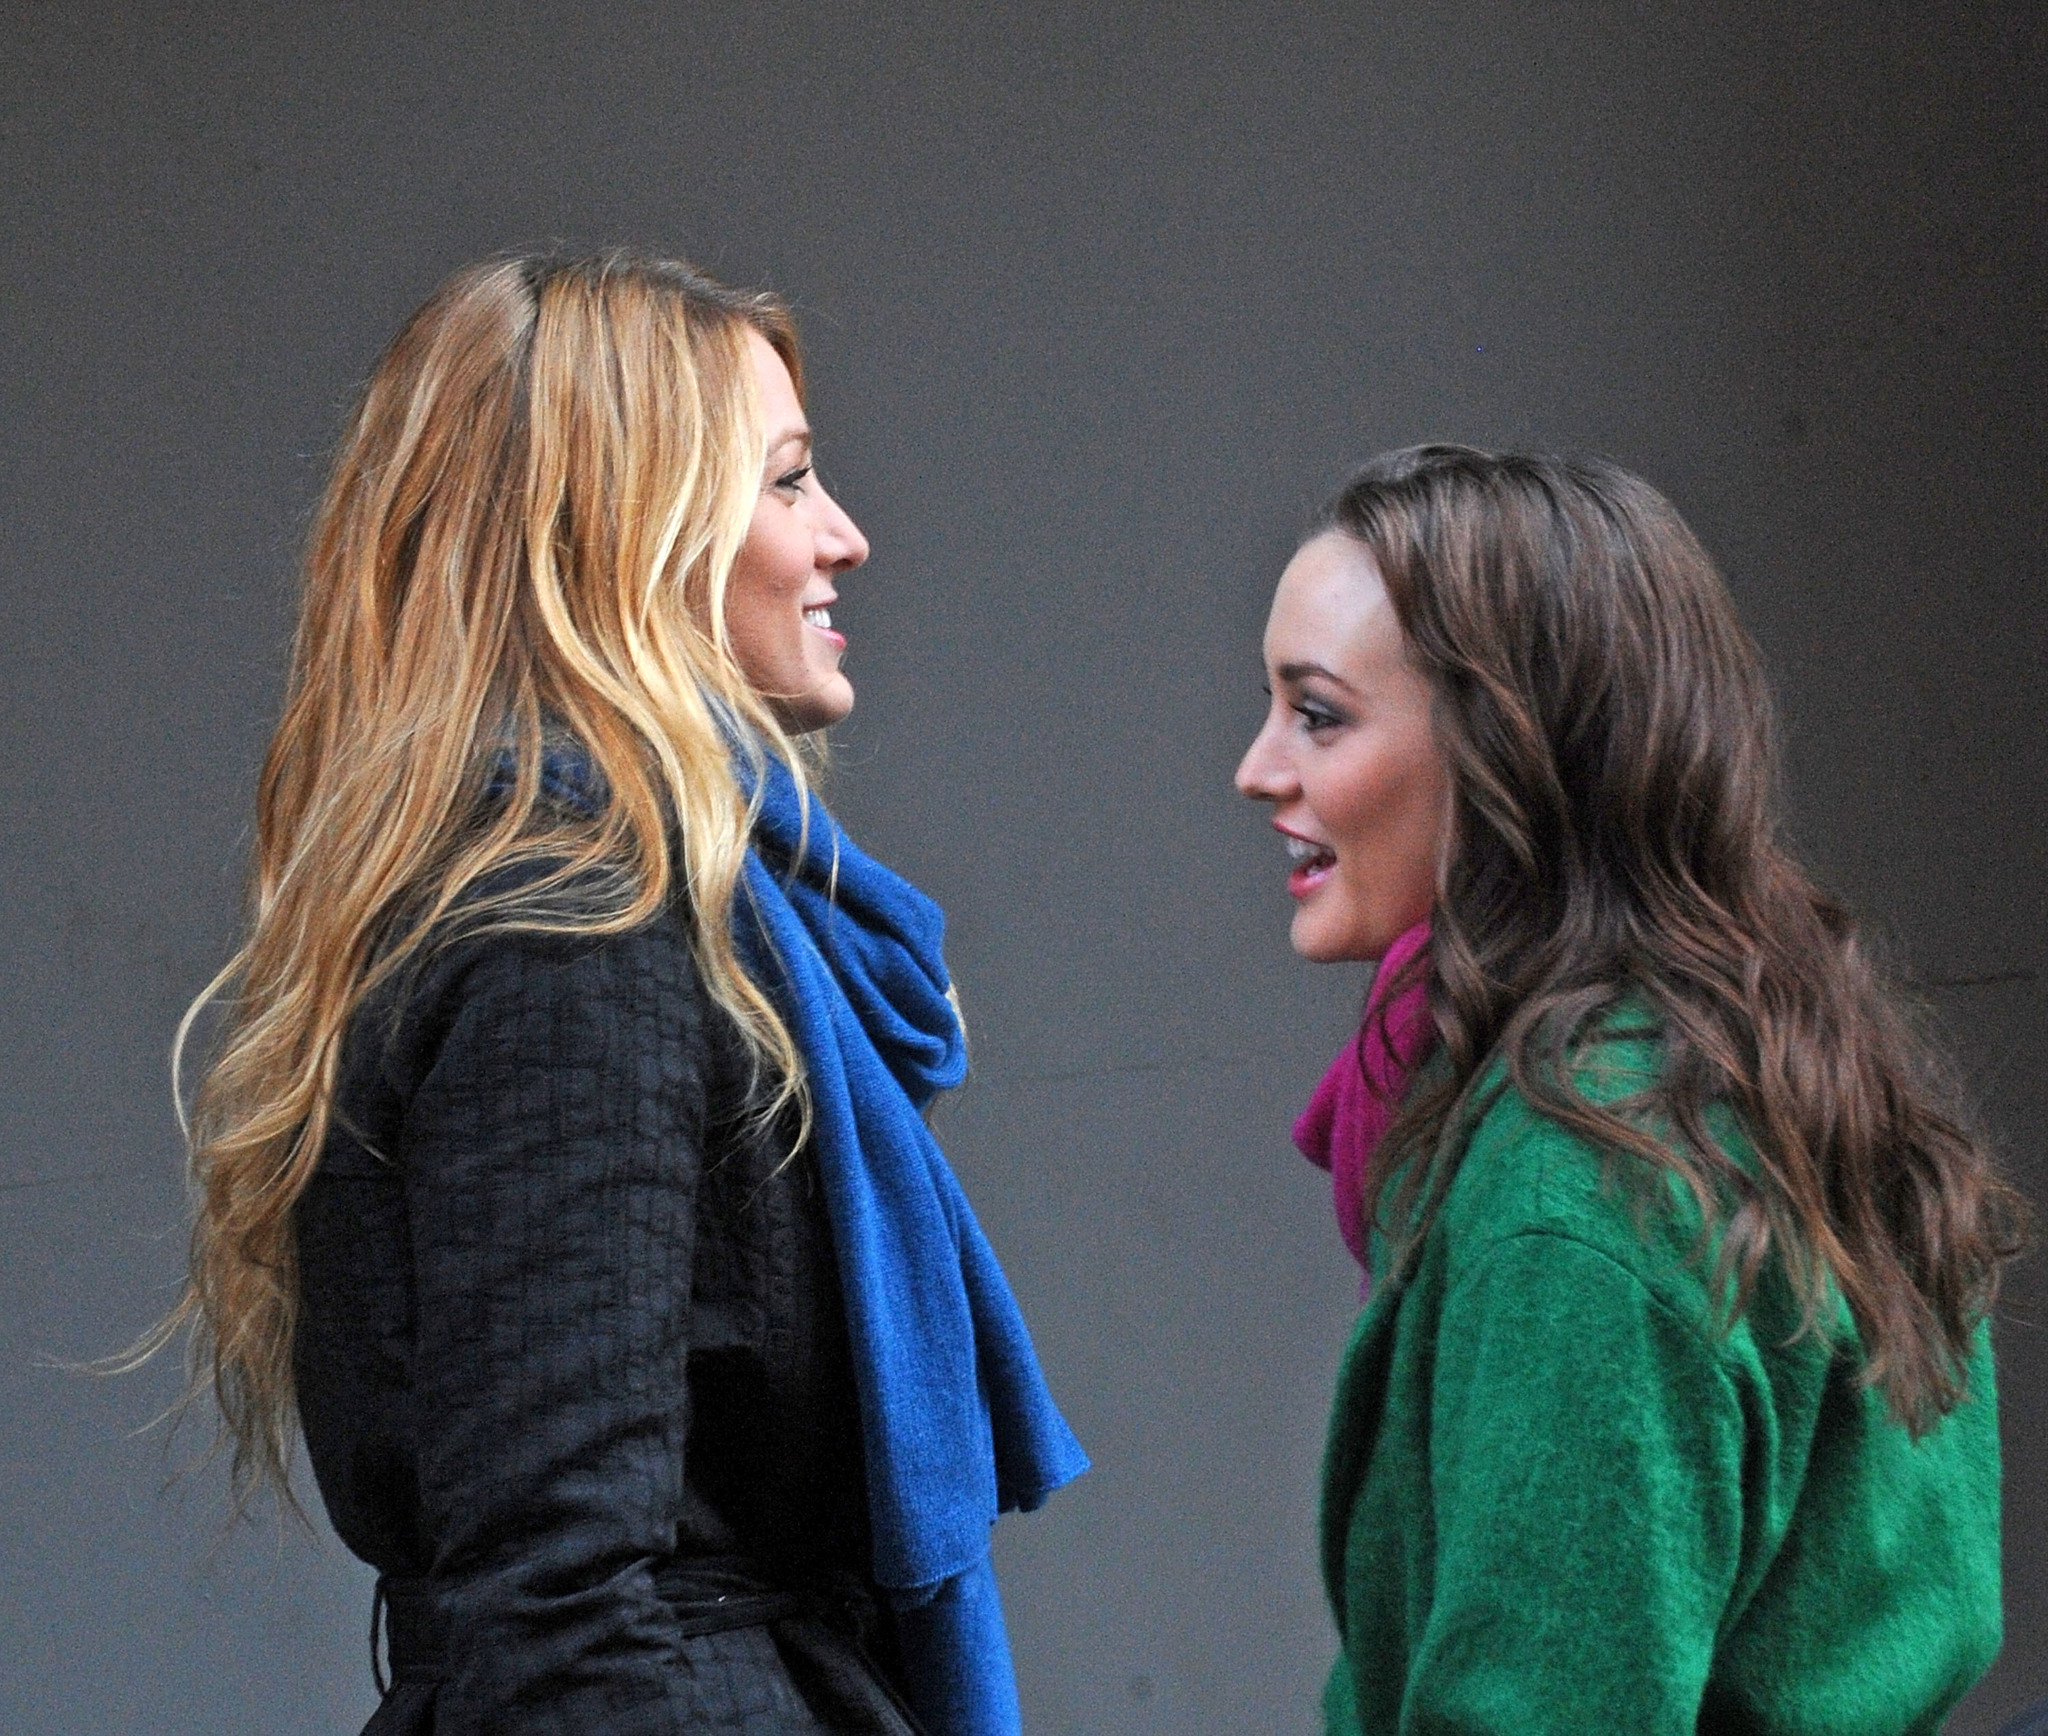 Blake Lively and Leighton Meester at event of Liezuvautoja (2007)